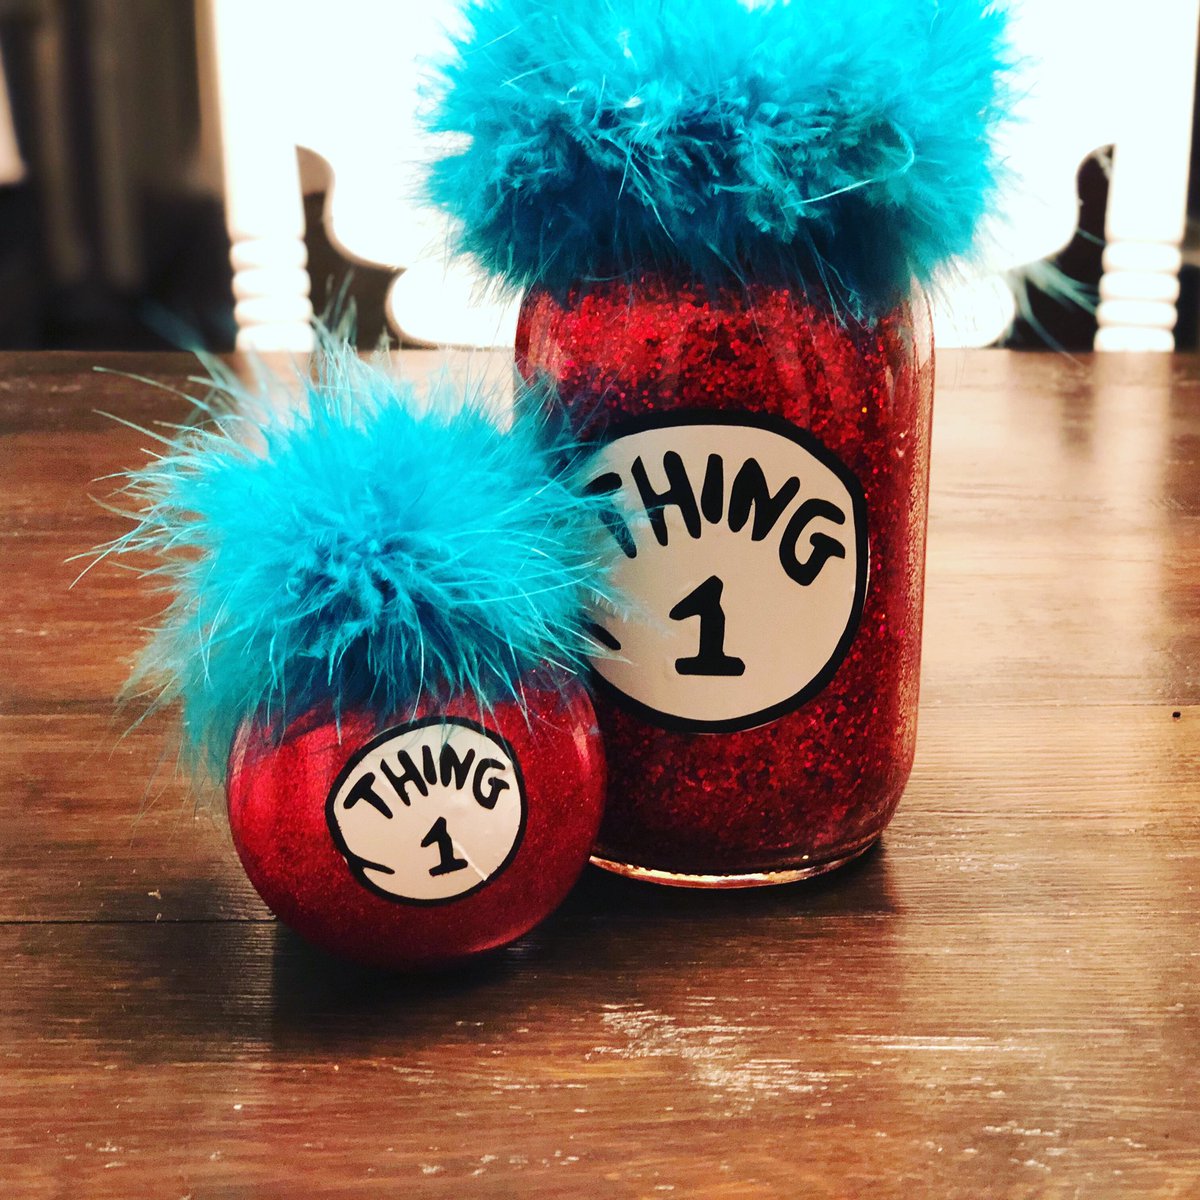 Can you say super cute!!! I love this Dr. Seuss Thing 1 ornament and tissue holder. Just added to my Etsy Shop.  etsy.me/2SZ2AqV #christmas #masonjar #masonjartissueholder #thing1 
#thing1thing2 #drseuss #etsy #cricut #etsyshop #cricutmade #etsyseller #tissueholder